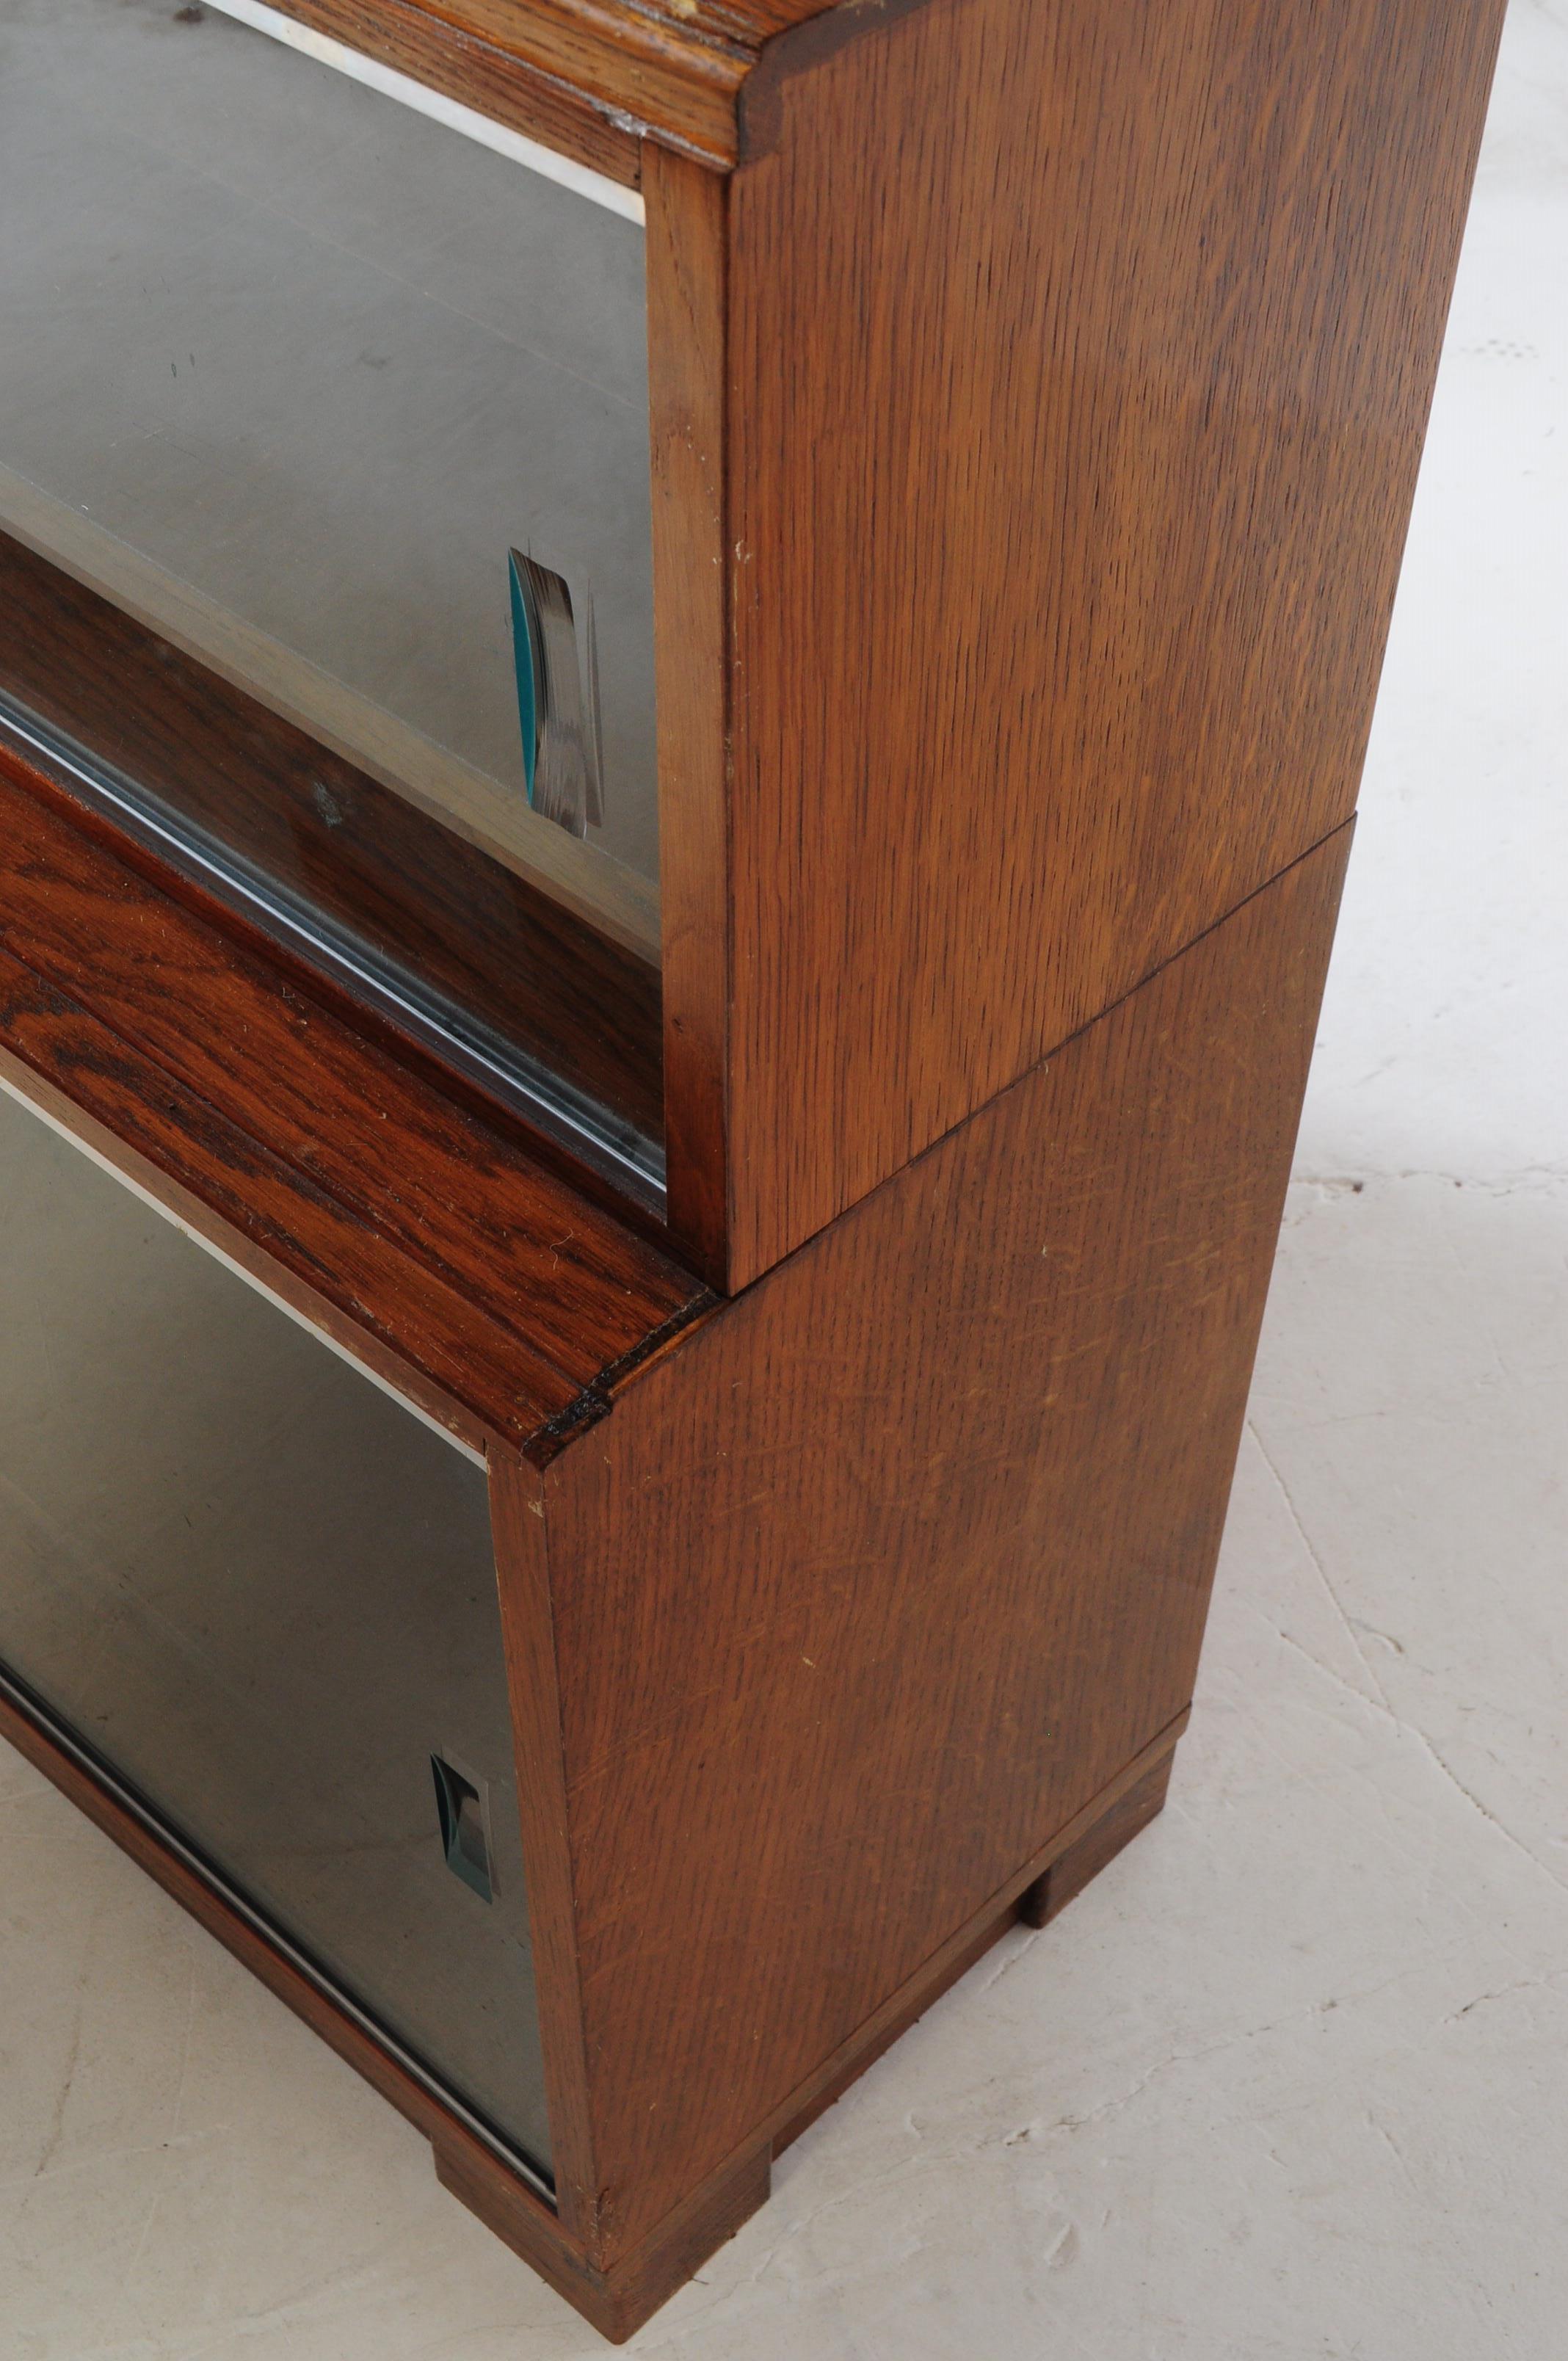 MINTY - MID CENTURY OAK TWIN STACK LAWYERS BOOKCASE - Image 5 of 6